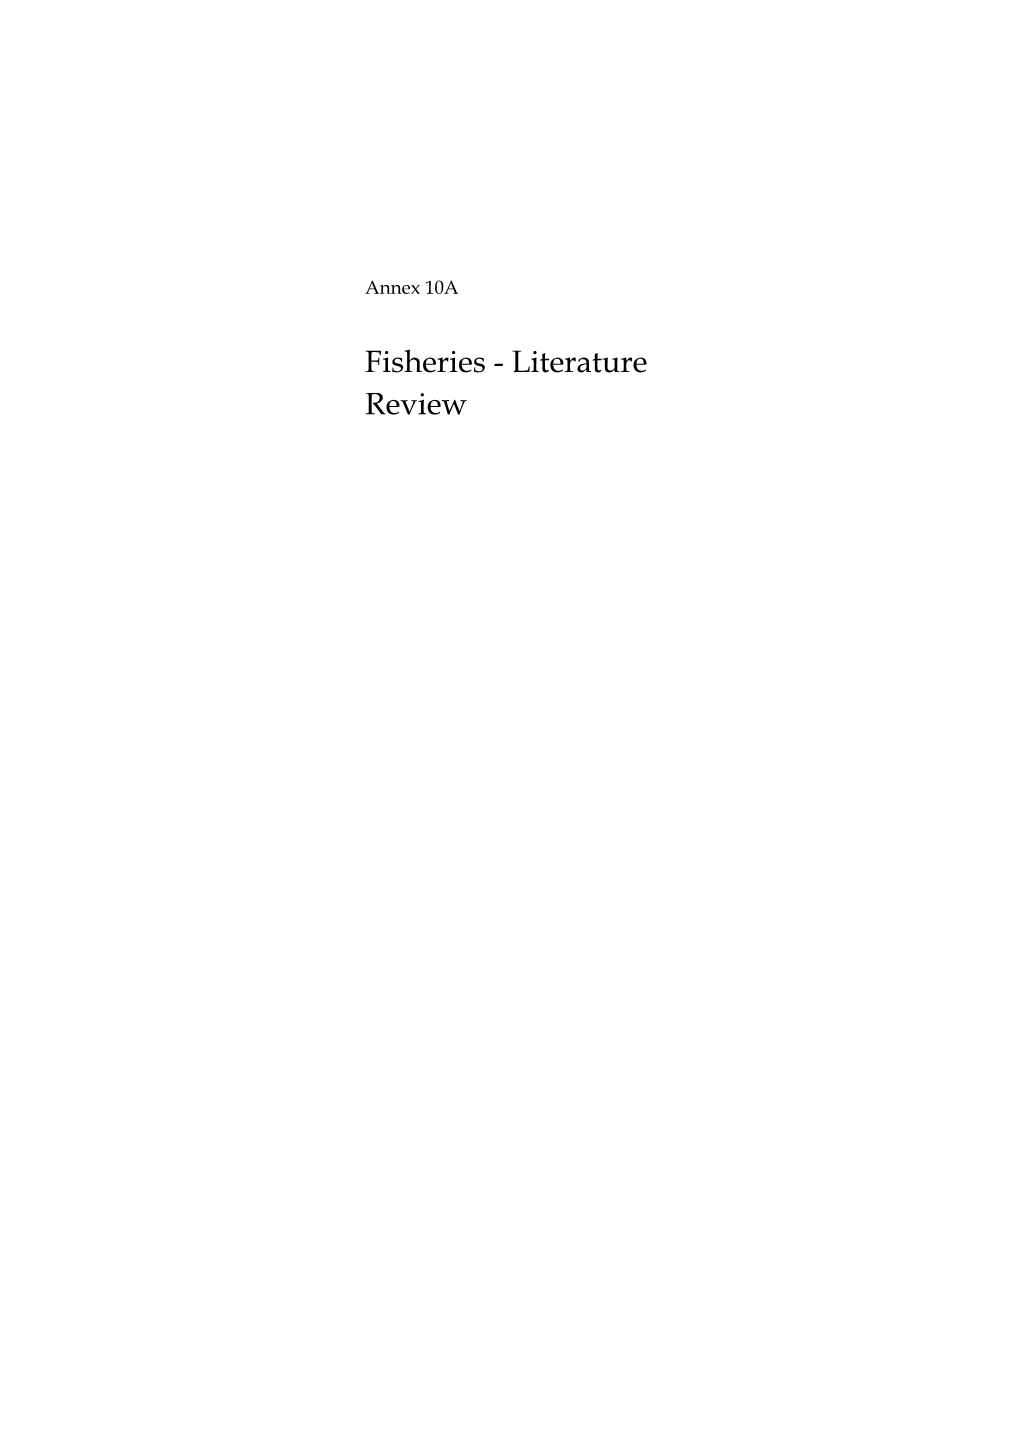 Fisheries - Literature Review